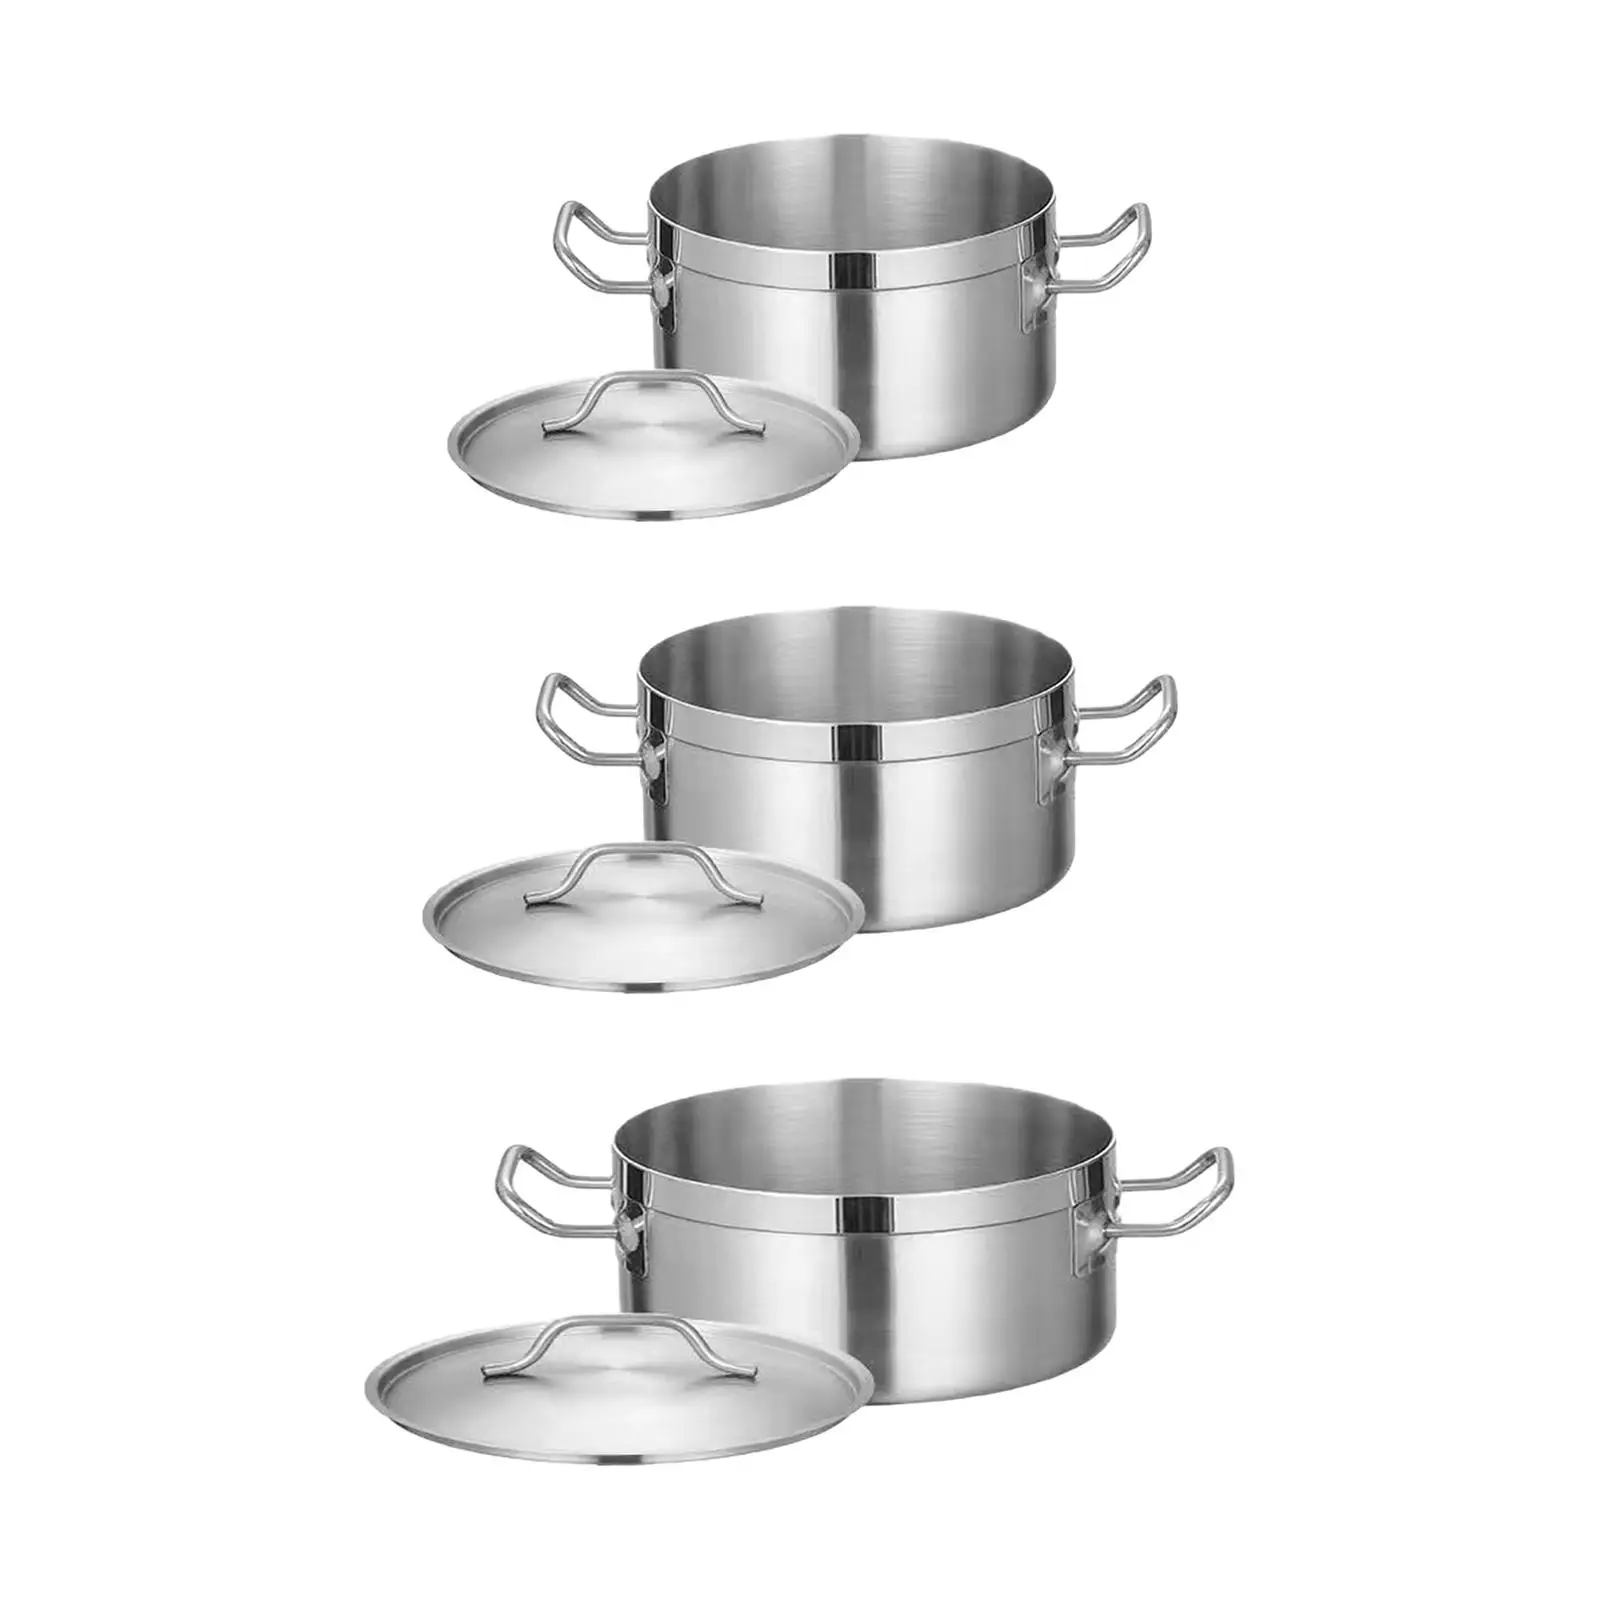 Stainless Steel Stockpot Soup Pot Stewing Pot Deep Pot Small Induction Pot Cooking Pot for Outdoor Camping Commercial Kitchen